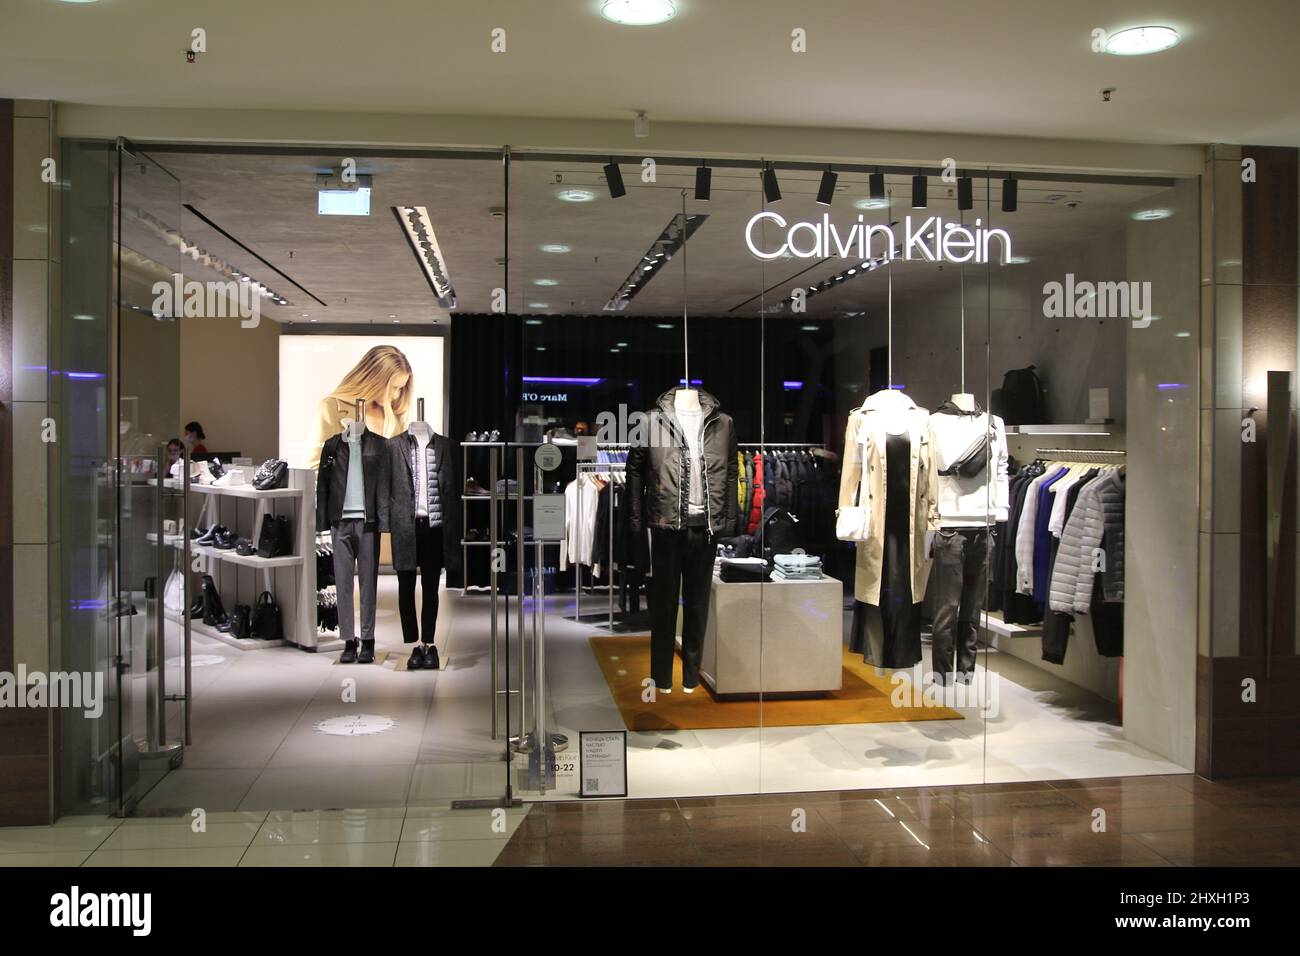 Calvin Klein store editorial stock photo. Image of mall - 174414313